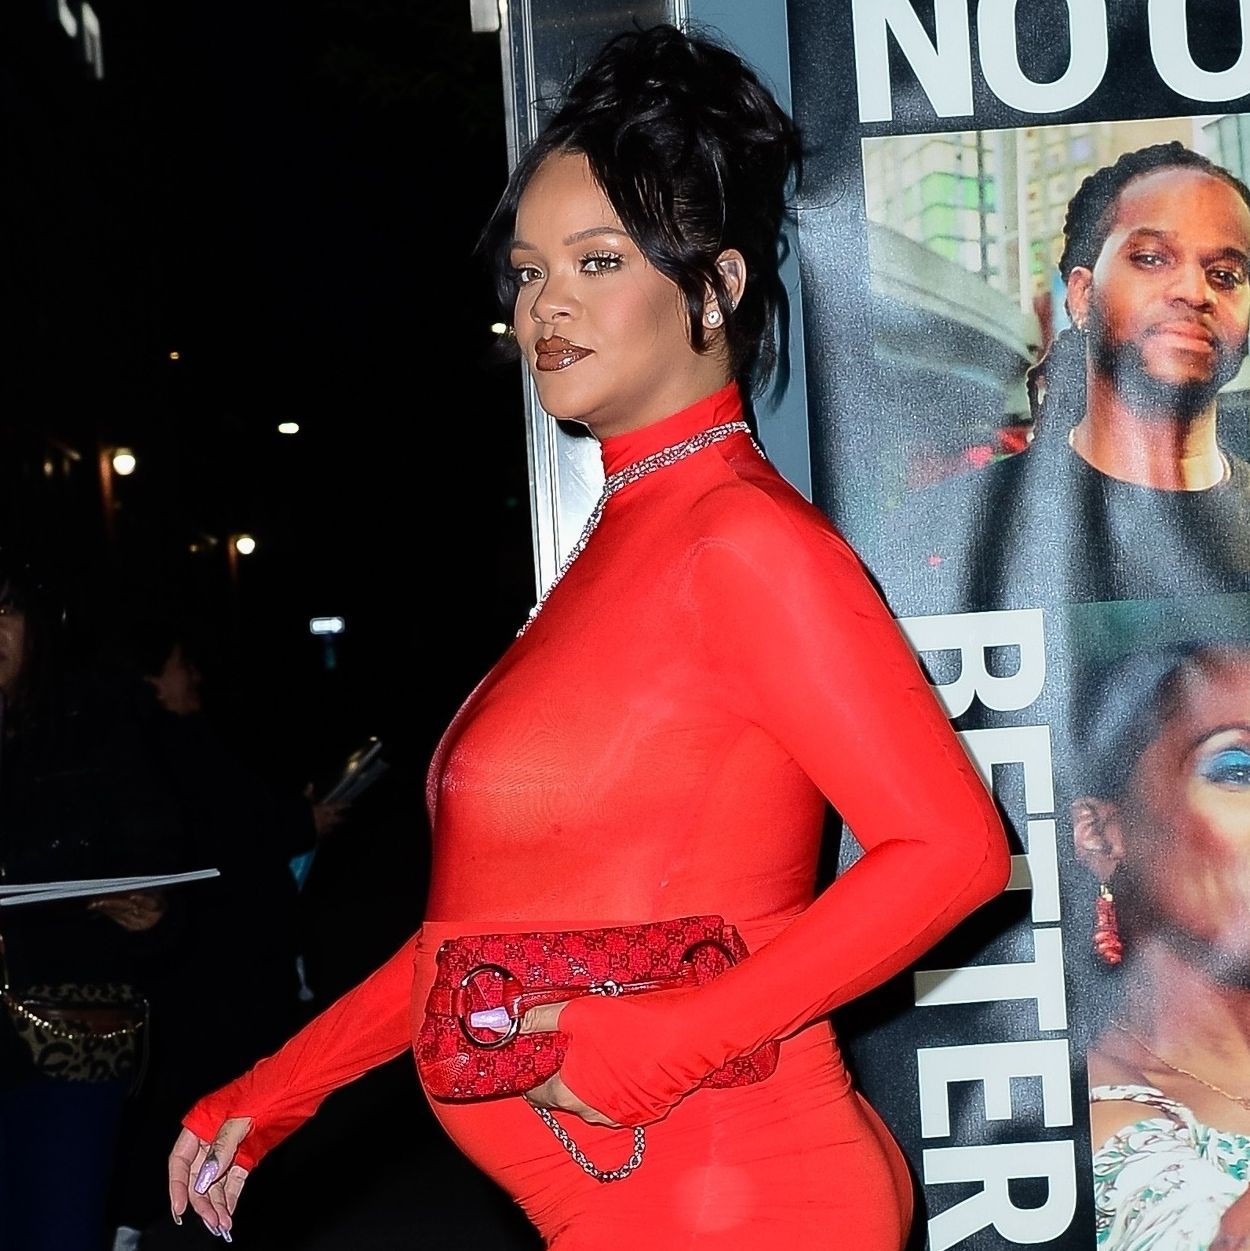 From Paris to New York, Rihanna's worldwide pregnancy fashion tour continues.